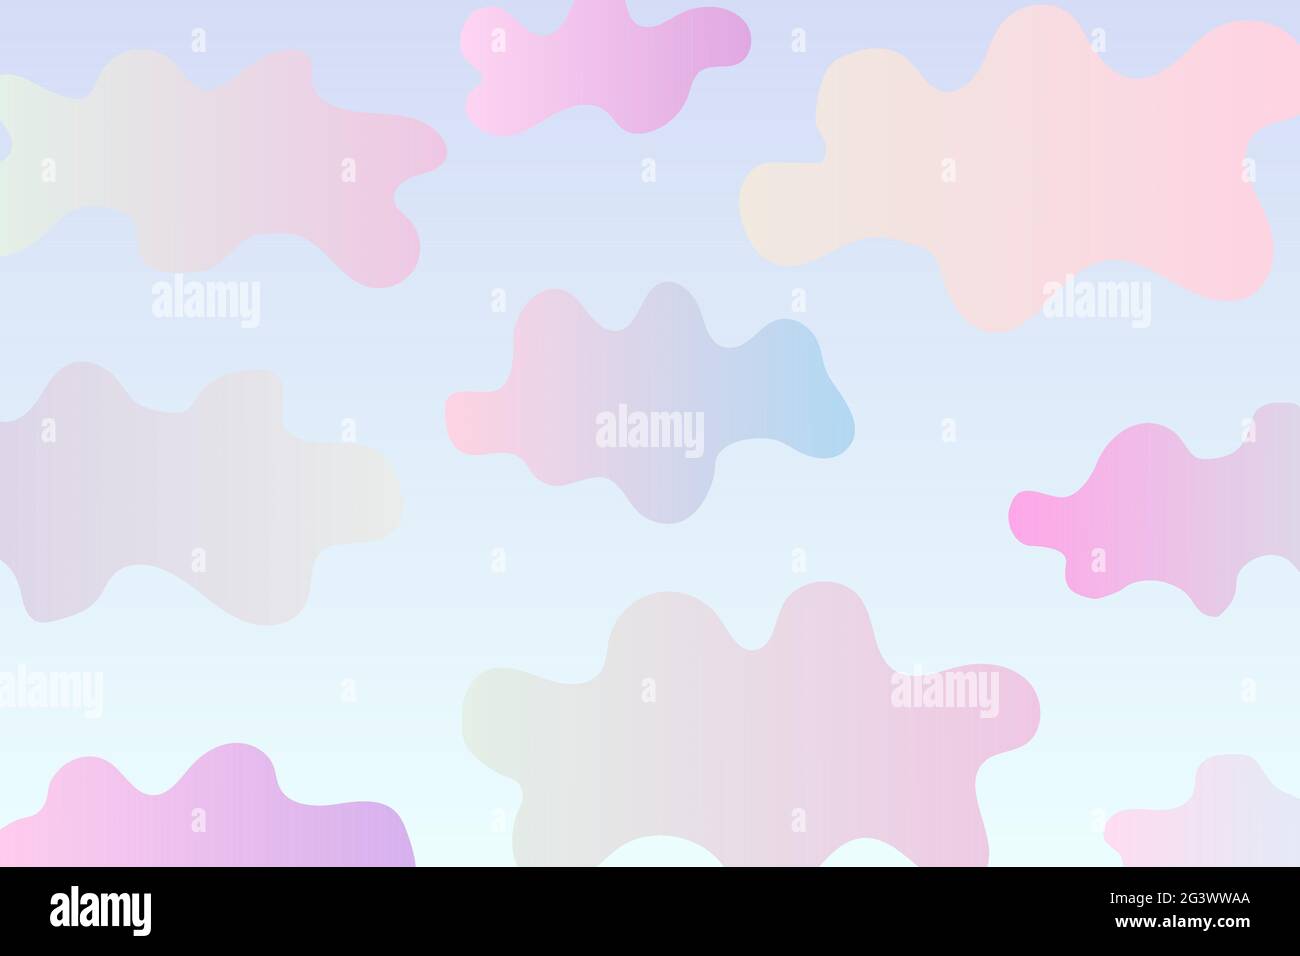 Abstract clouds banner. Gradient clouds on blue sky background. Purple, pink, blue colorful hand-drawn cumulus clouds. Copy space. Summer bright lands Stock Vector